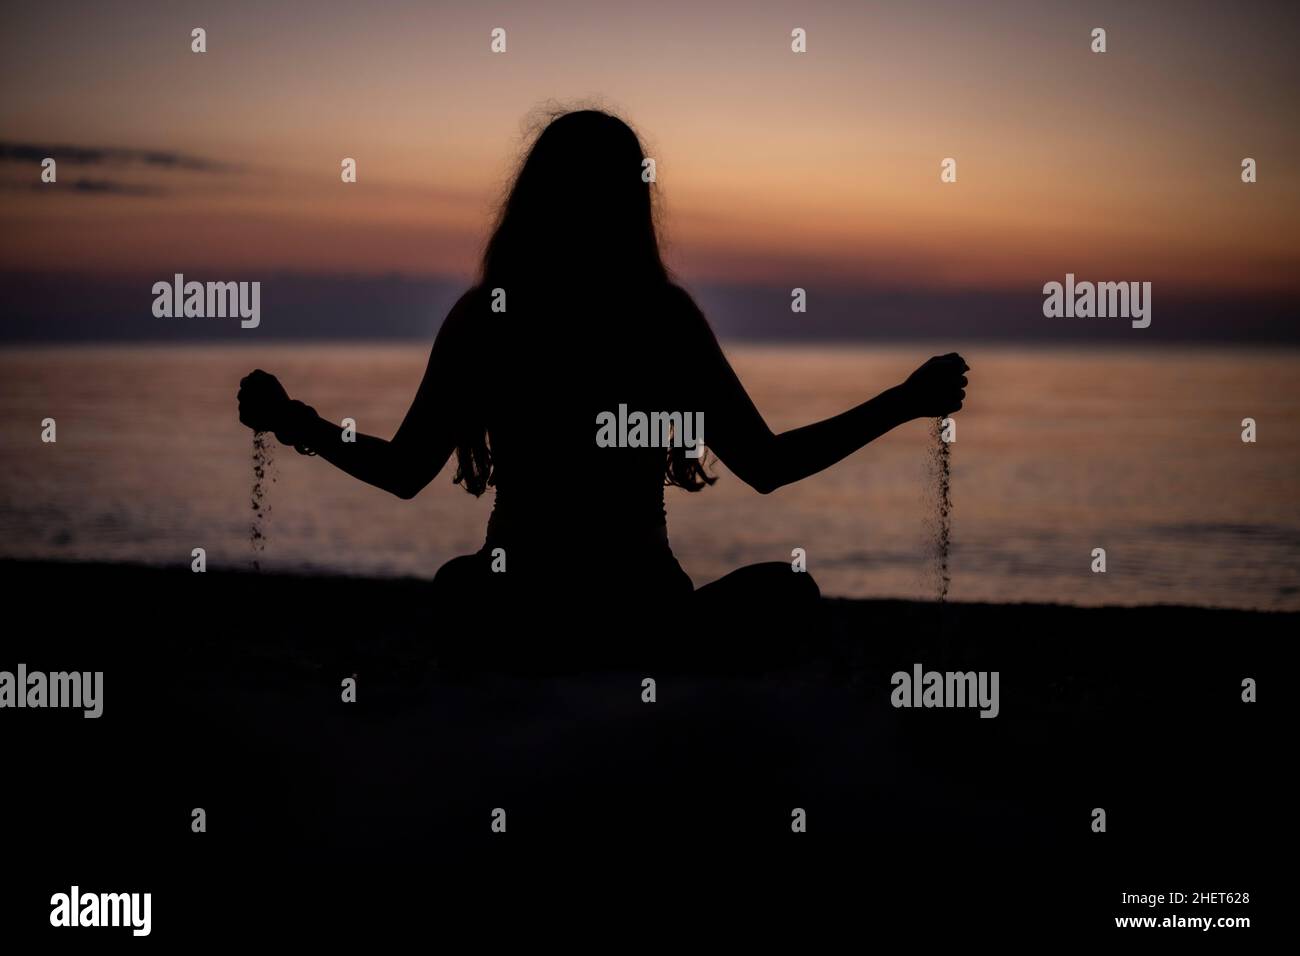 Rear view of a silhouette of a woman playing with sand sitting on a beach at sunset Stock Photo